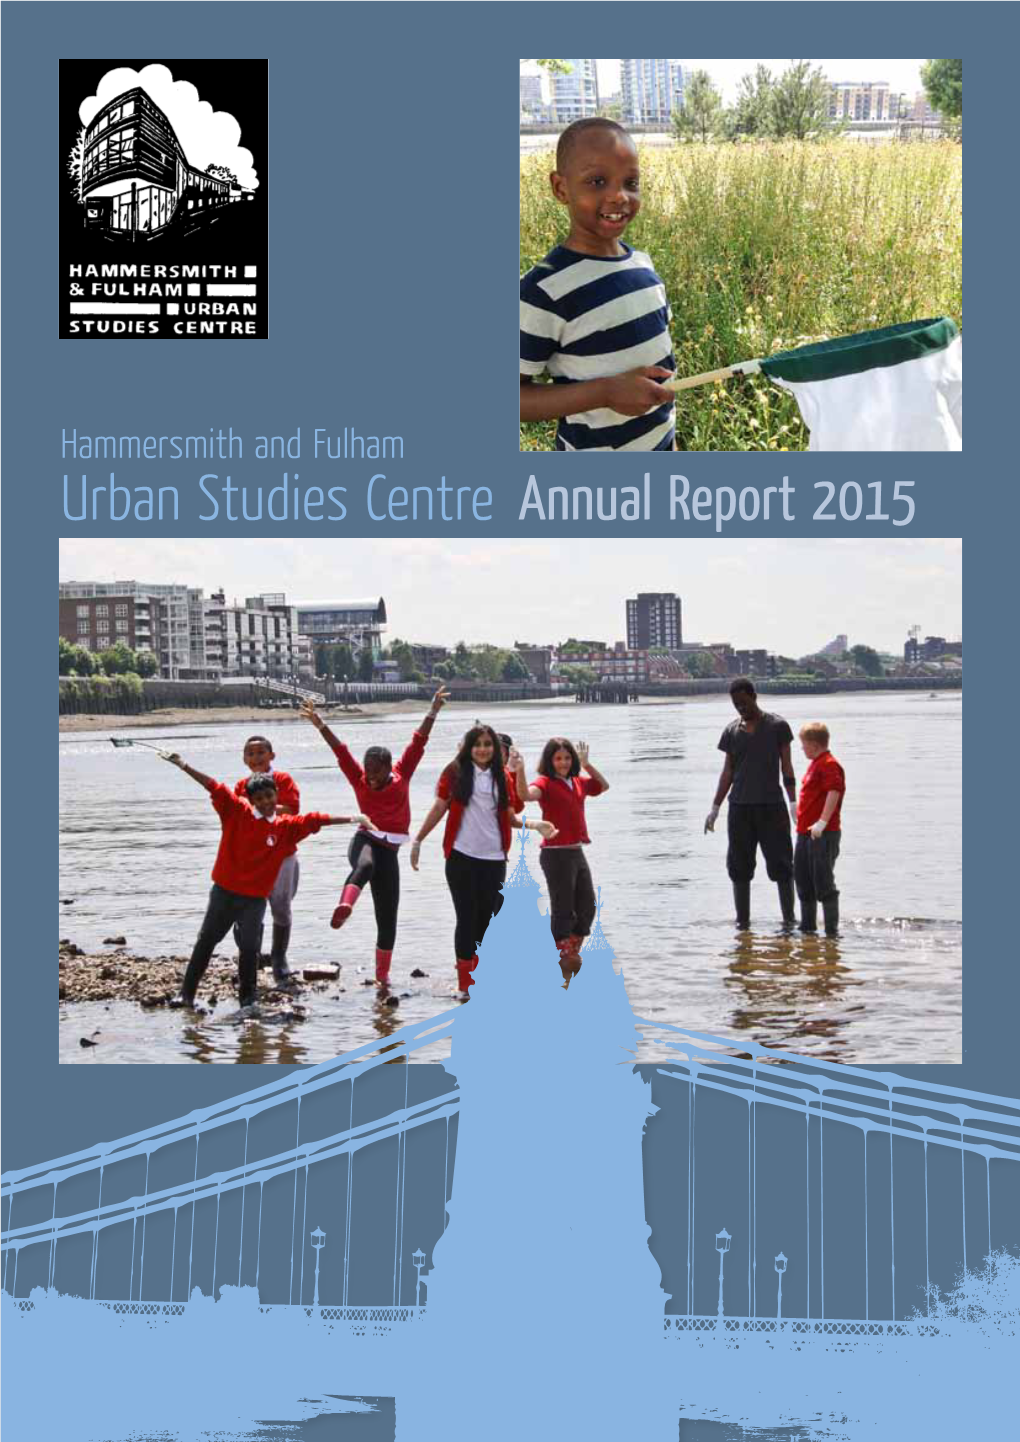 Annual Report 2015 About Urban Studies